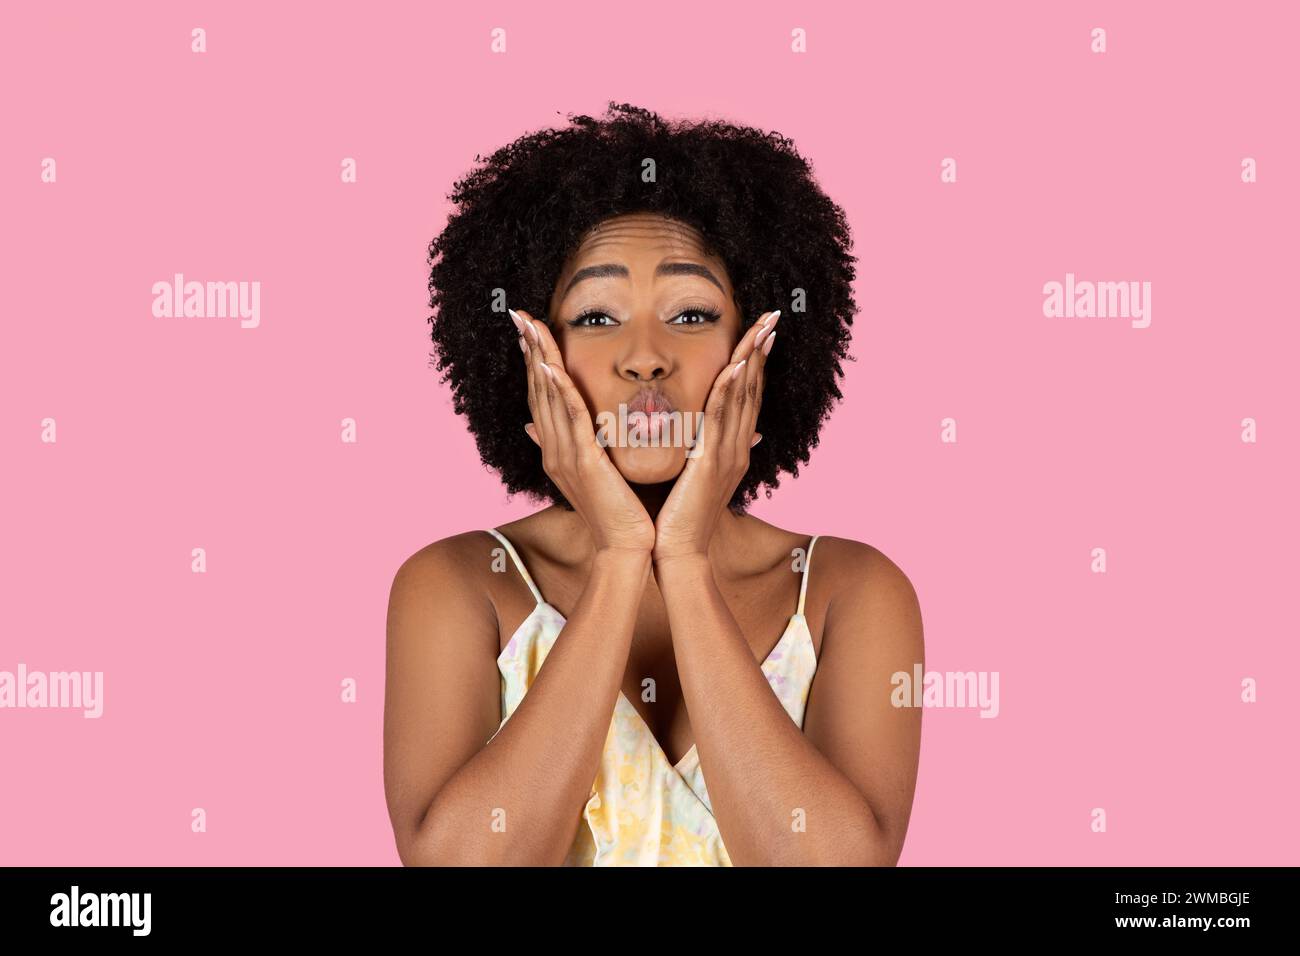 Playful African American woman with curly hair making a funny face with puffed cheeks Stock Photo